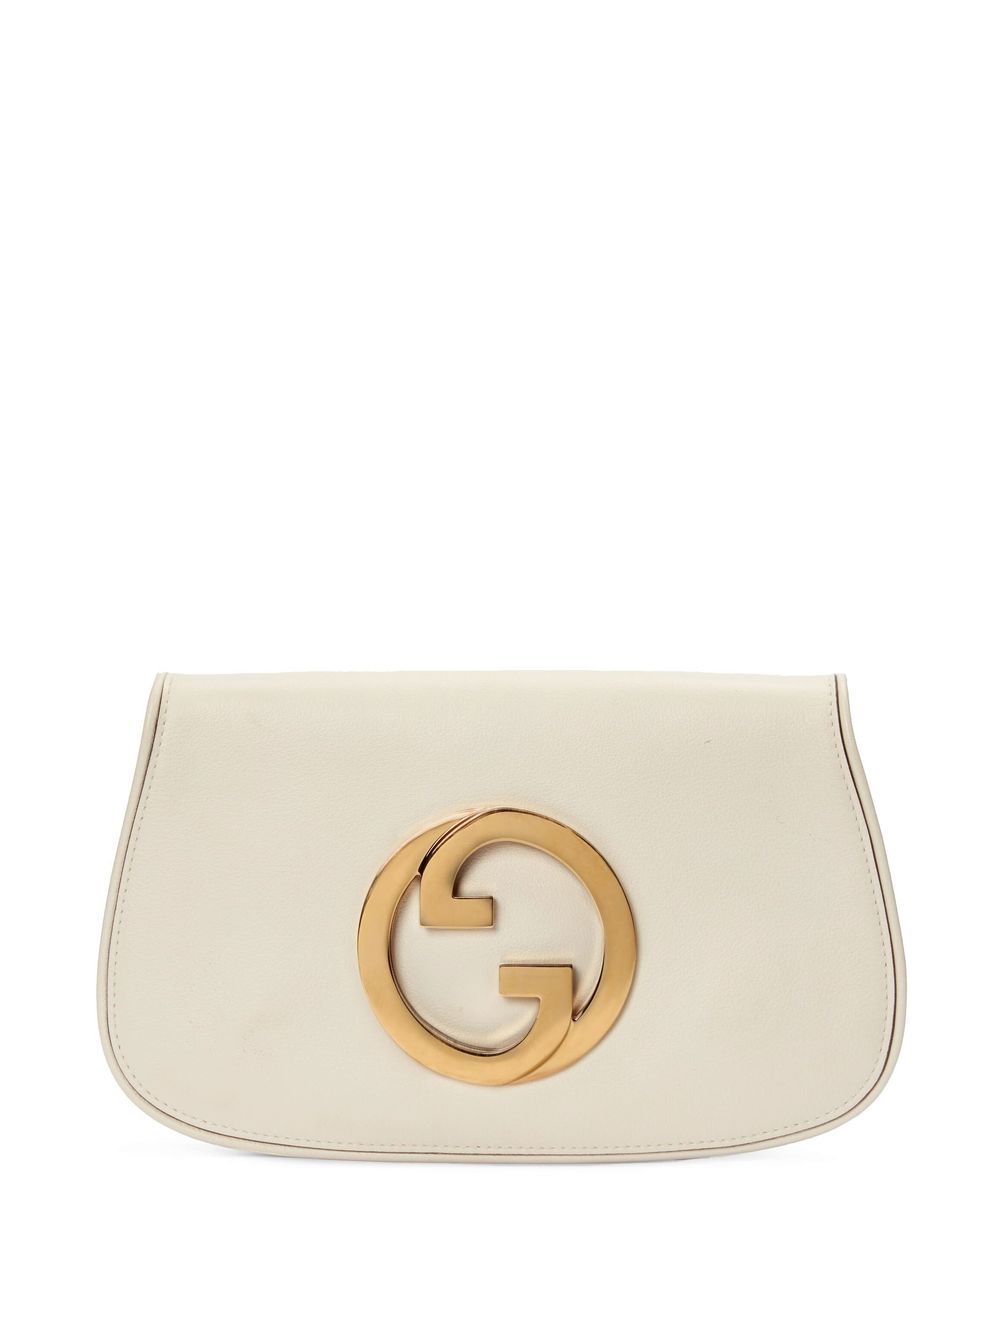 Gucci Blondie: The New Vintage-Inspired Bag You Need To Know